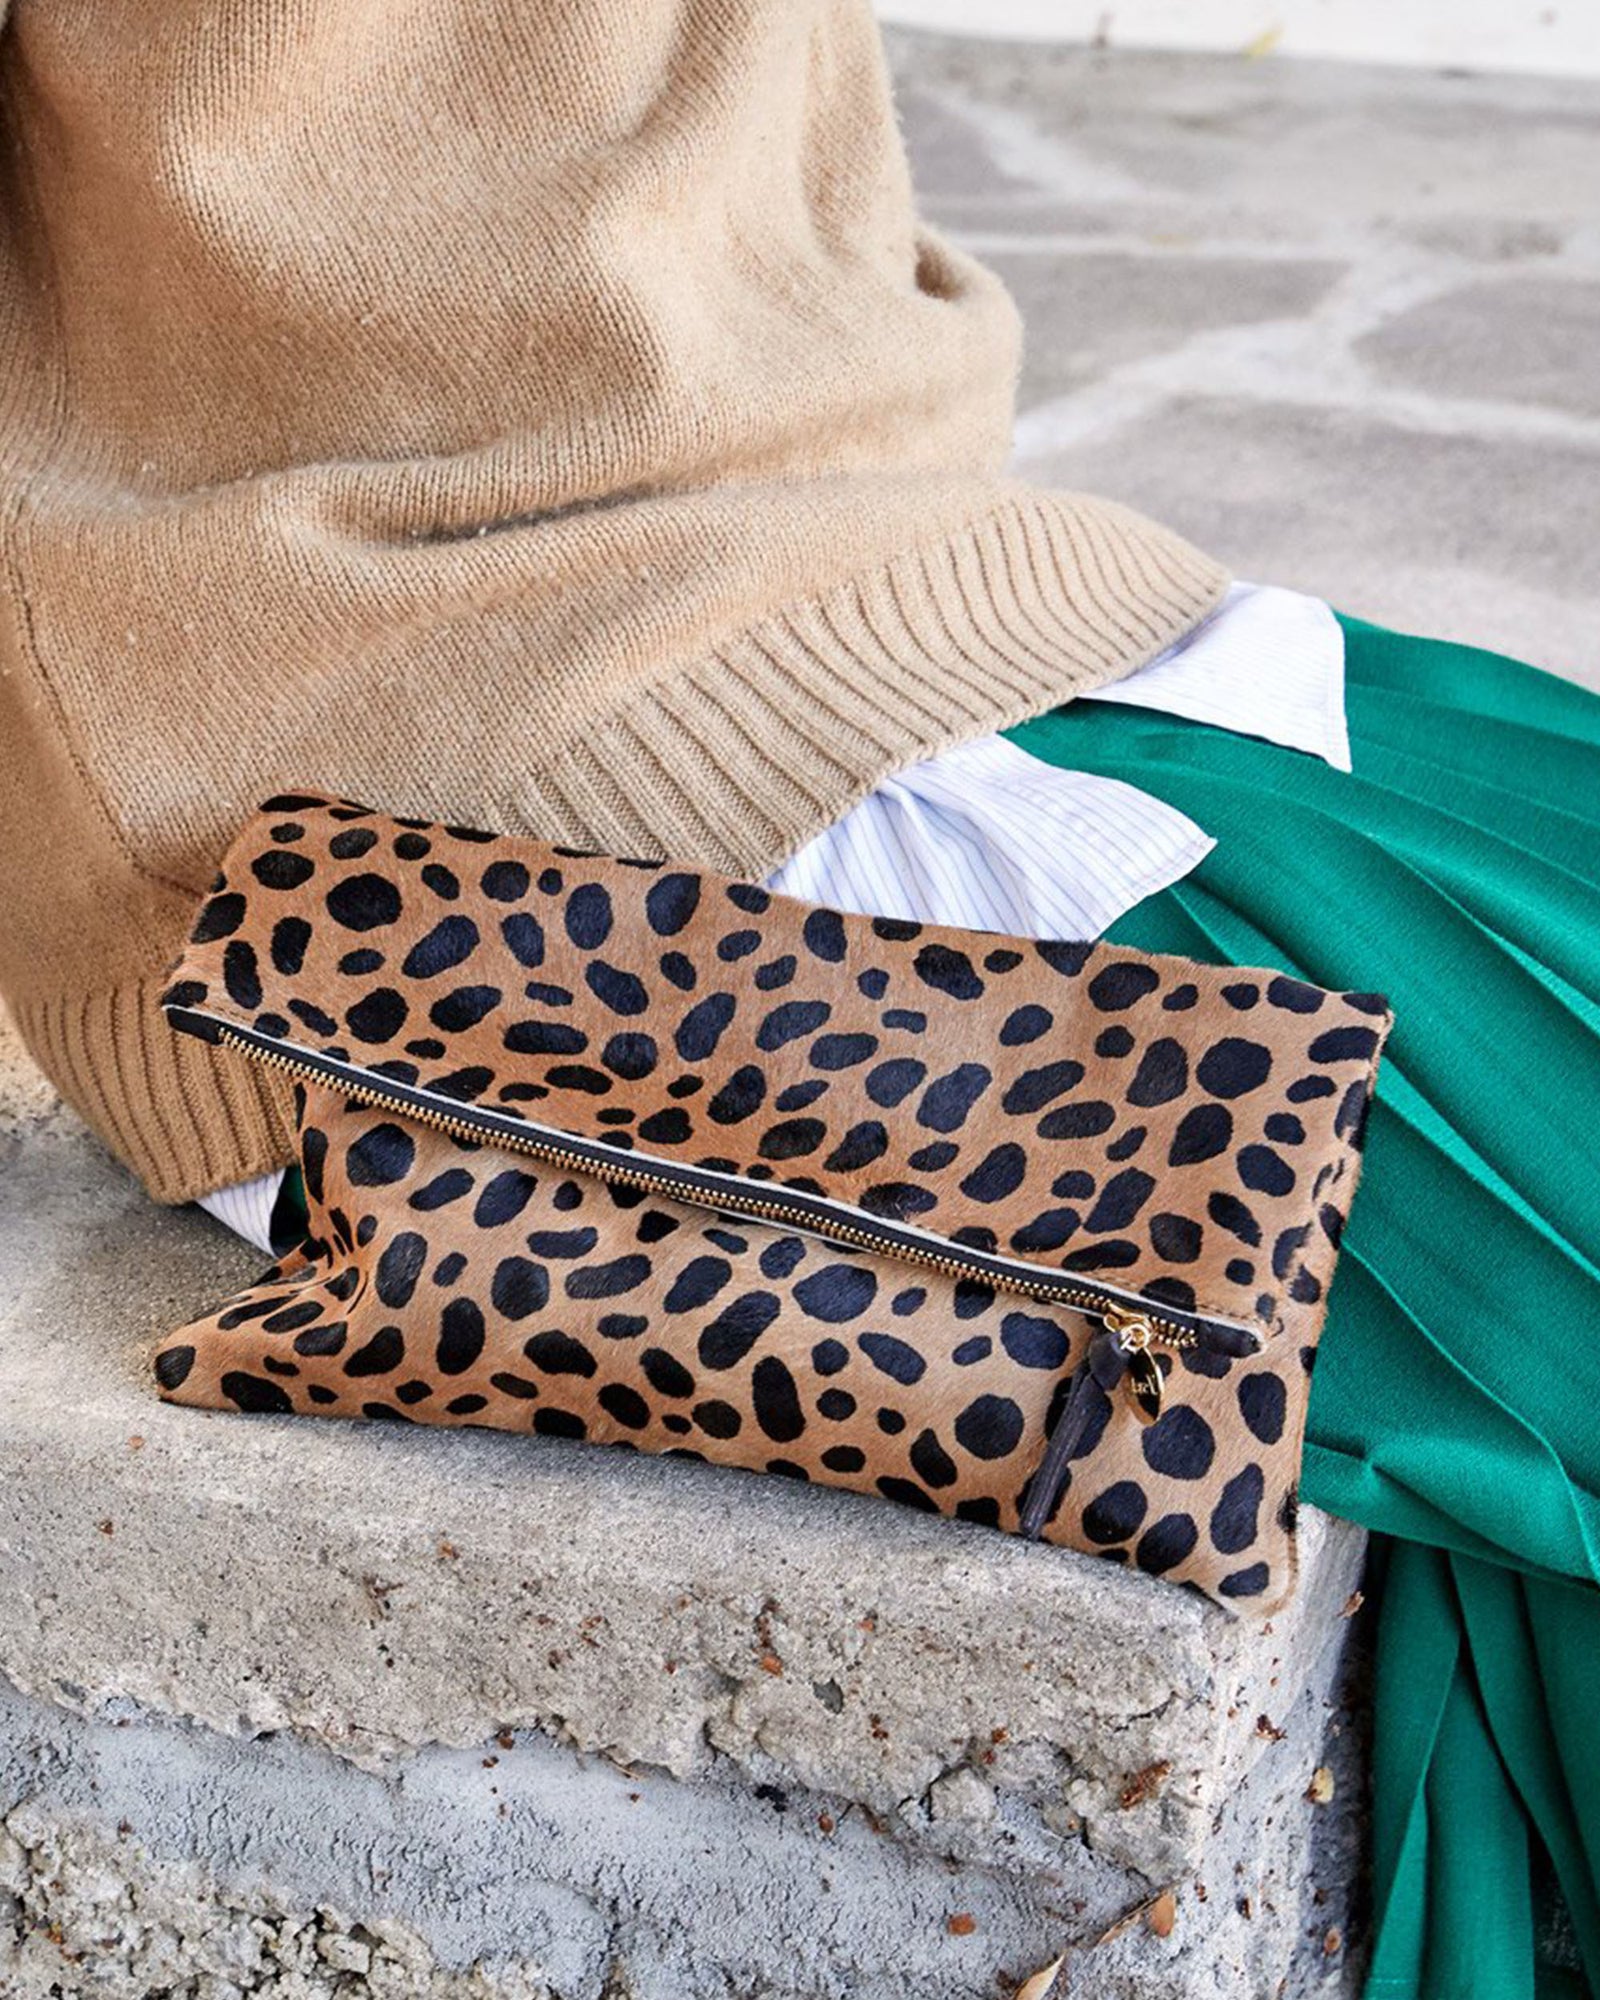 Foldover Clutch in Leopard Hair sitting next to Mecca on a step